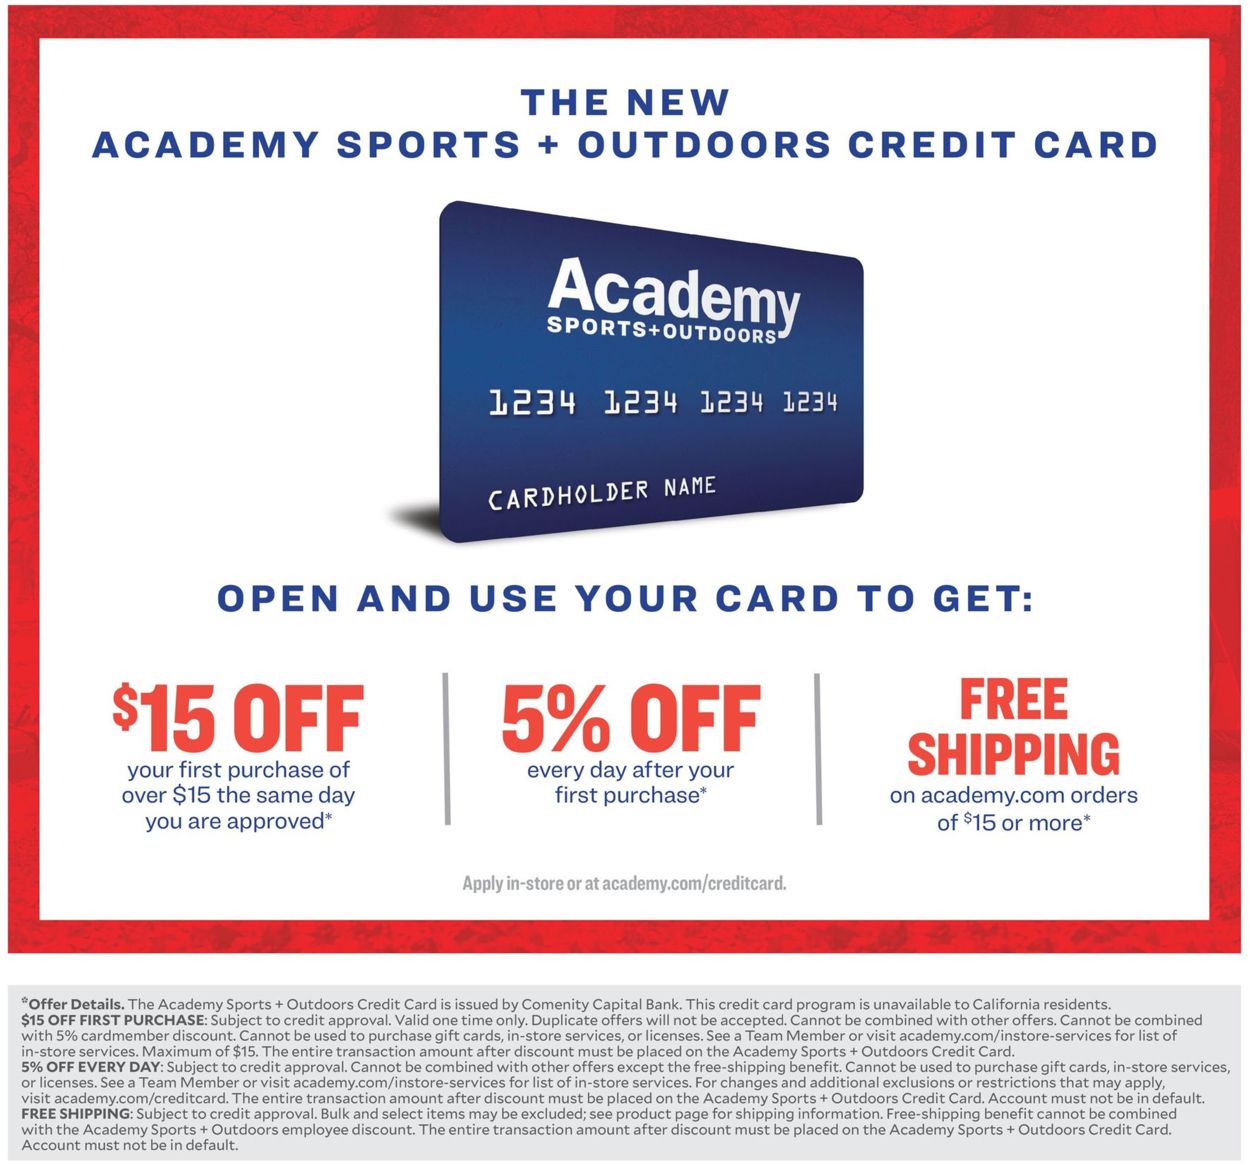 Catalogue Academy Sports from 07/06/2020